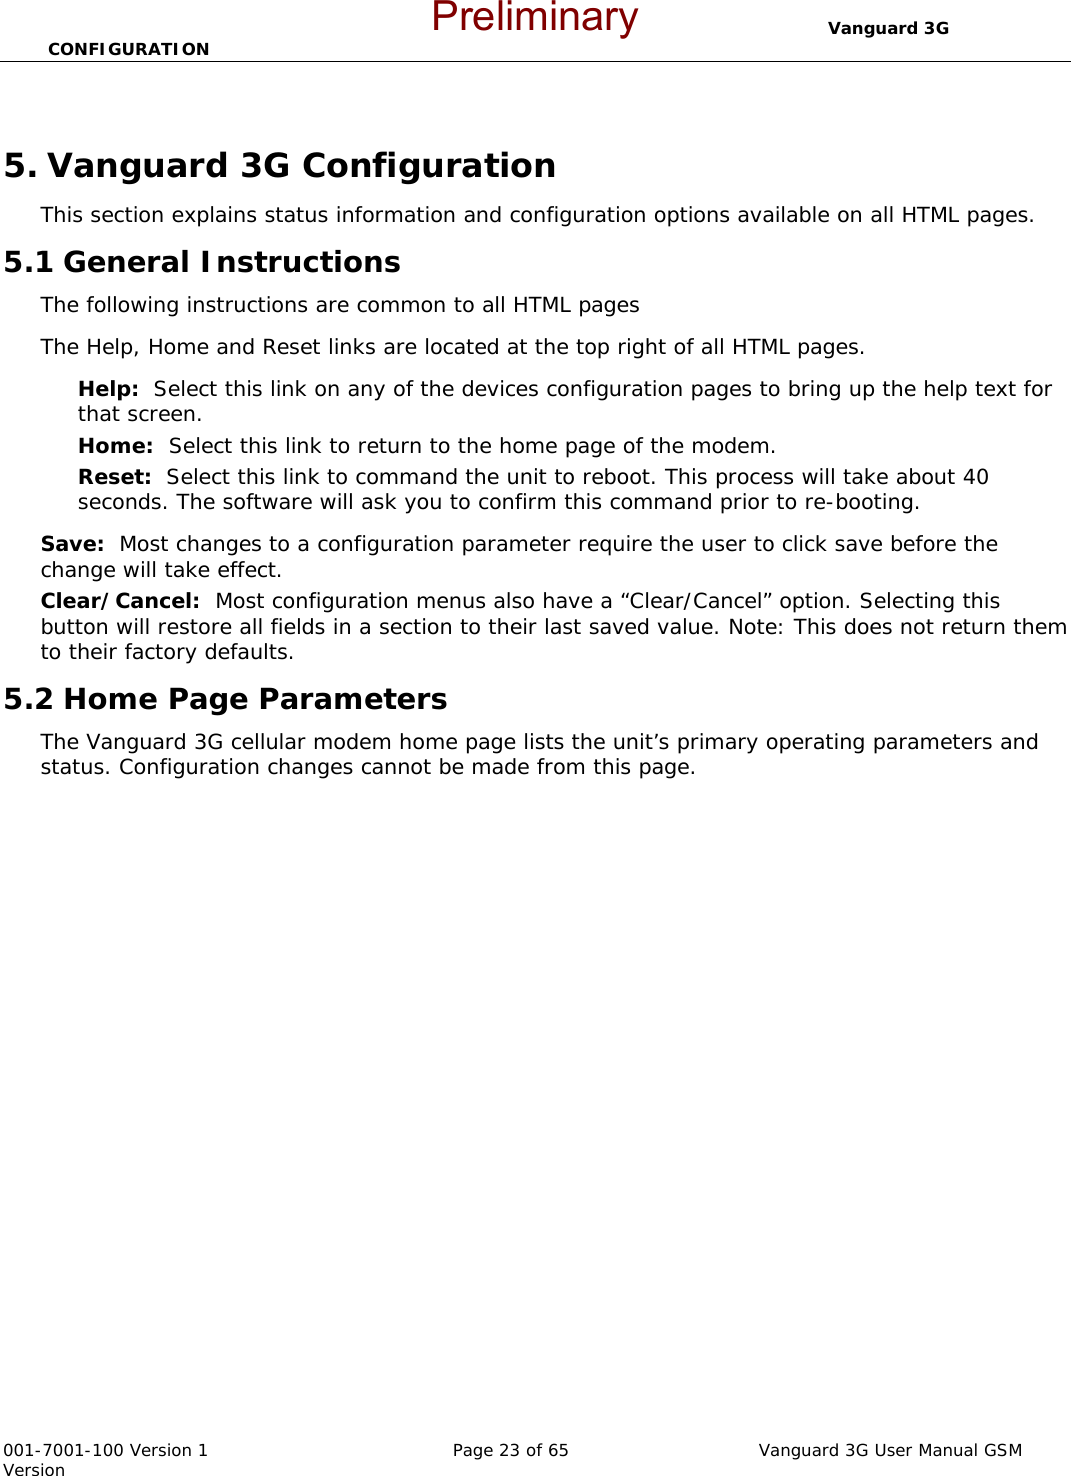                                  Vanguard 3G CONFIGURATION  001-7001-100 Version 1       Page 23 of 65       Vanguard 3G User Manual GSM Version  5. Vanguard 3G Configuration This section explains status information and configuration options available on all HTML pages.   5.1 General Instructions The following instructions are common to all HTML pages The Help, Home and Reset links are located at the top right of all HTML pages.   Help:  Select this link on any of the devices configuration pages to bring up the help text for that screen.   Home:  Select this link to return to the home page of the modem.   Reset:  Select this link to command the unit to reboot. This process will take about 40 seconds. The software will ask you to confirm this command prior to re-booting.     Save:  Most changes to a configuration parameter require the user to click save before the change will take effect.   Clear/Cancel:  Most configuration menus also have a “Clear/Cancel” option. Selecting this button will restore all fields in a section to their last saved value. Note: This does not return them to their factory defaults.   5.2 Home Page Parameters The Vanguard 3G cellular modem home page lists the unit’s primary operating parameters and status. Configuration changes cannot be made from this page.     Preliminary